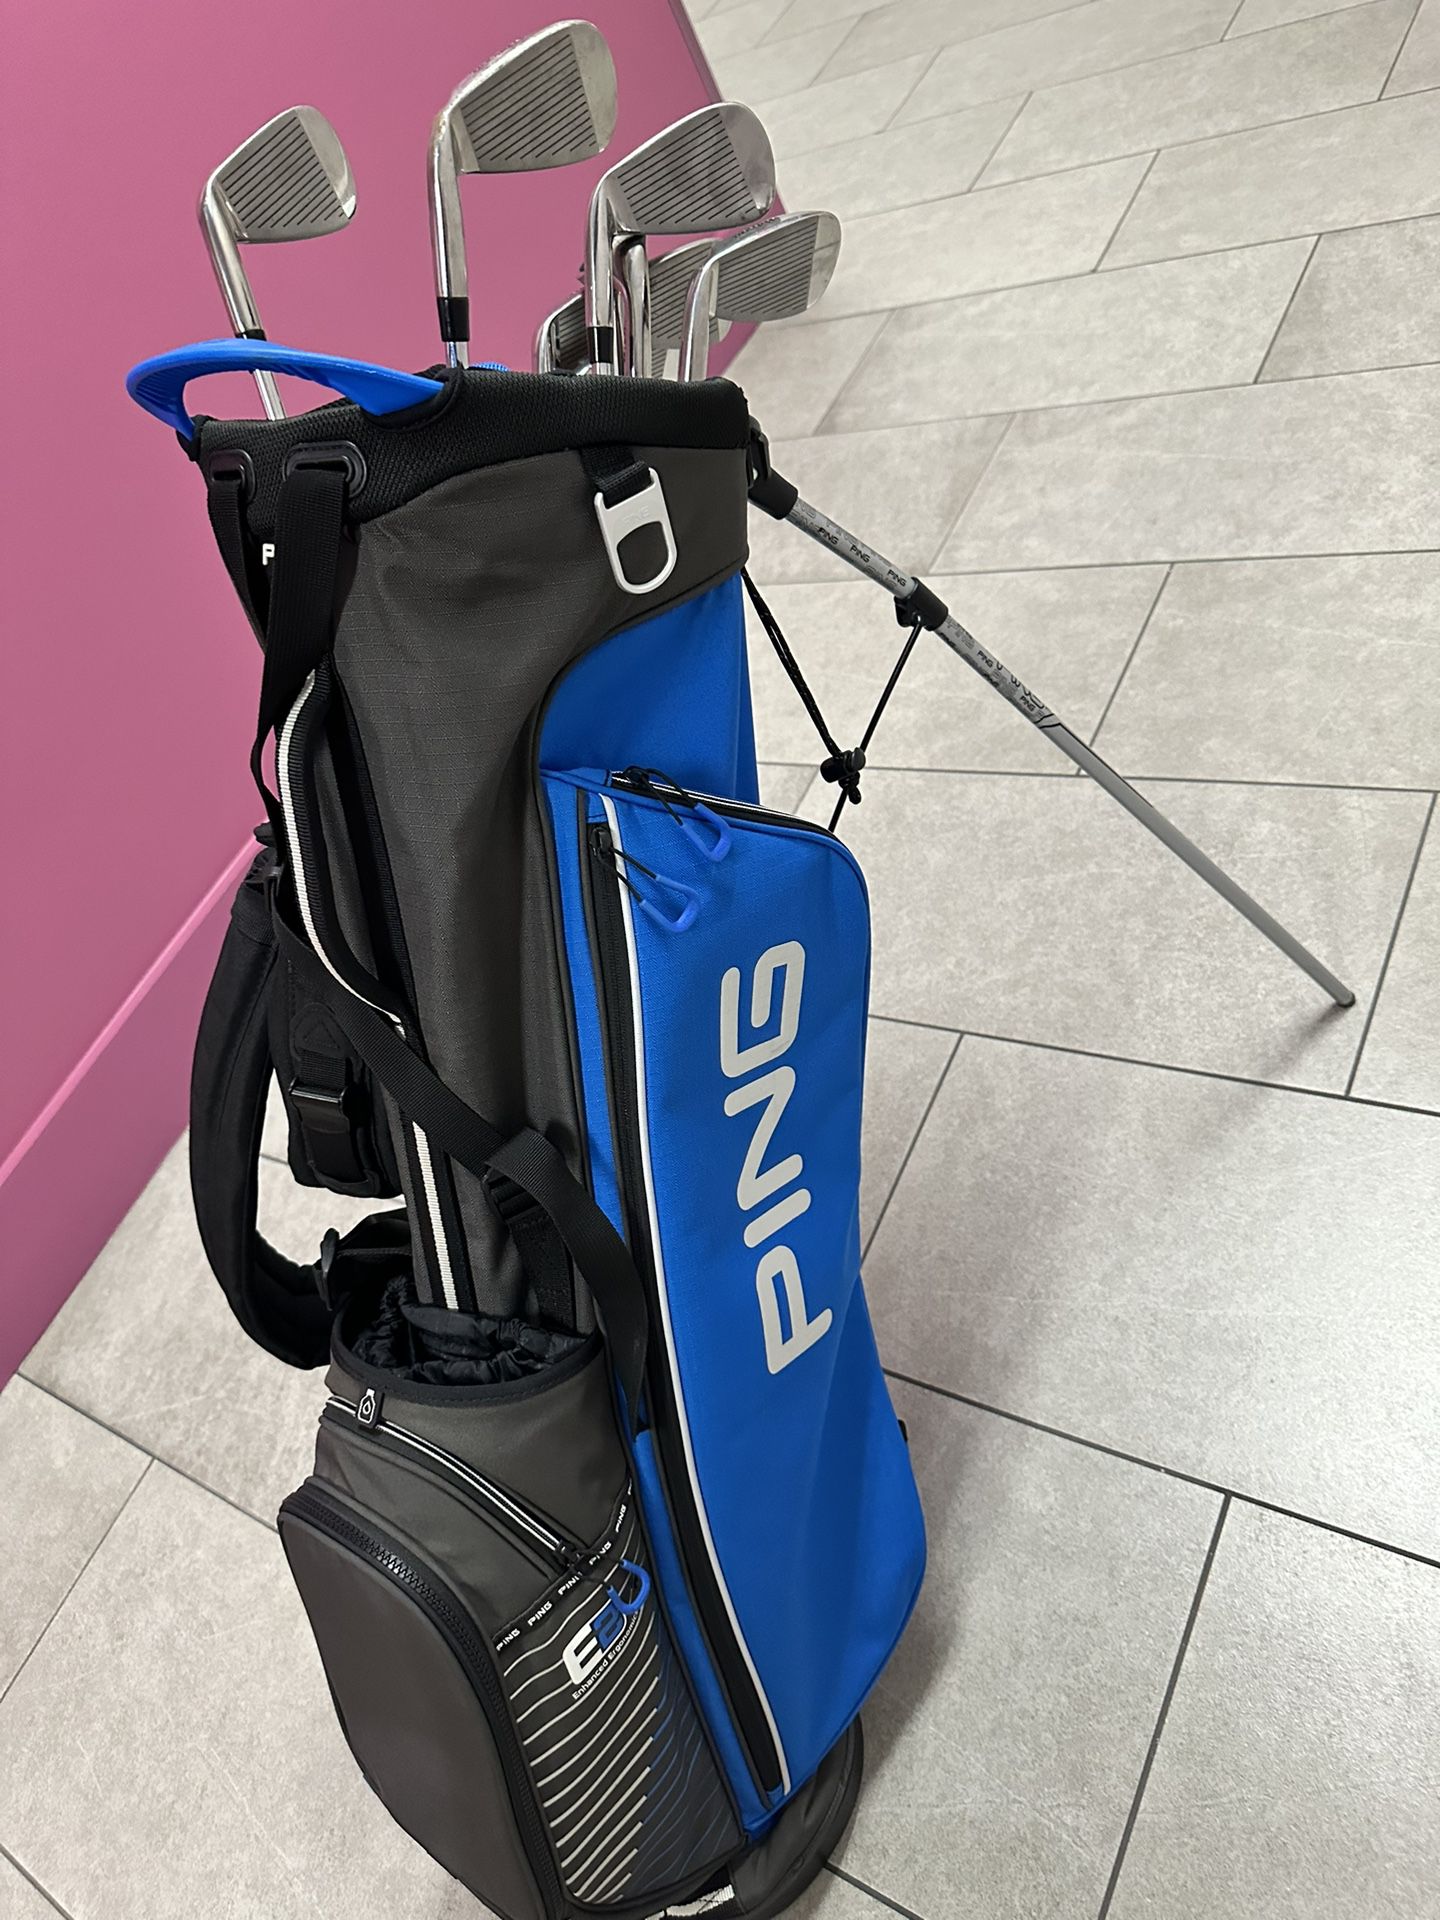 KIDS GOLF CLUBS & BAG (8 Clubs) - Pick Up From Brickell